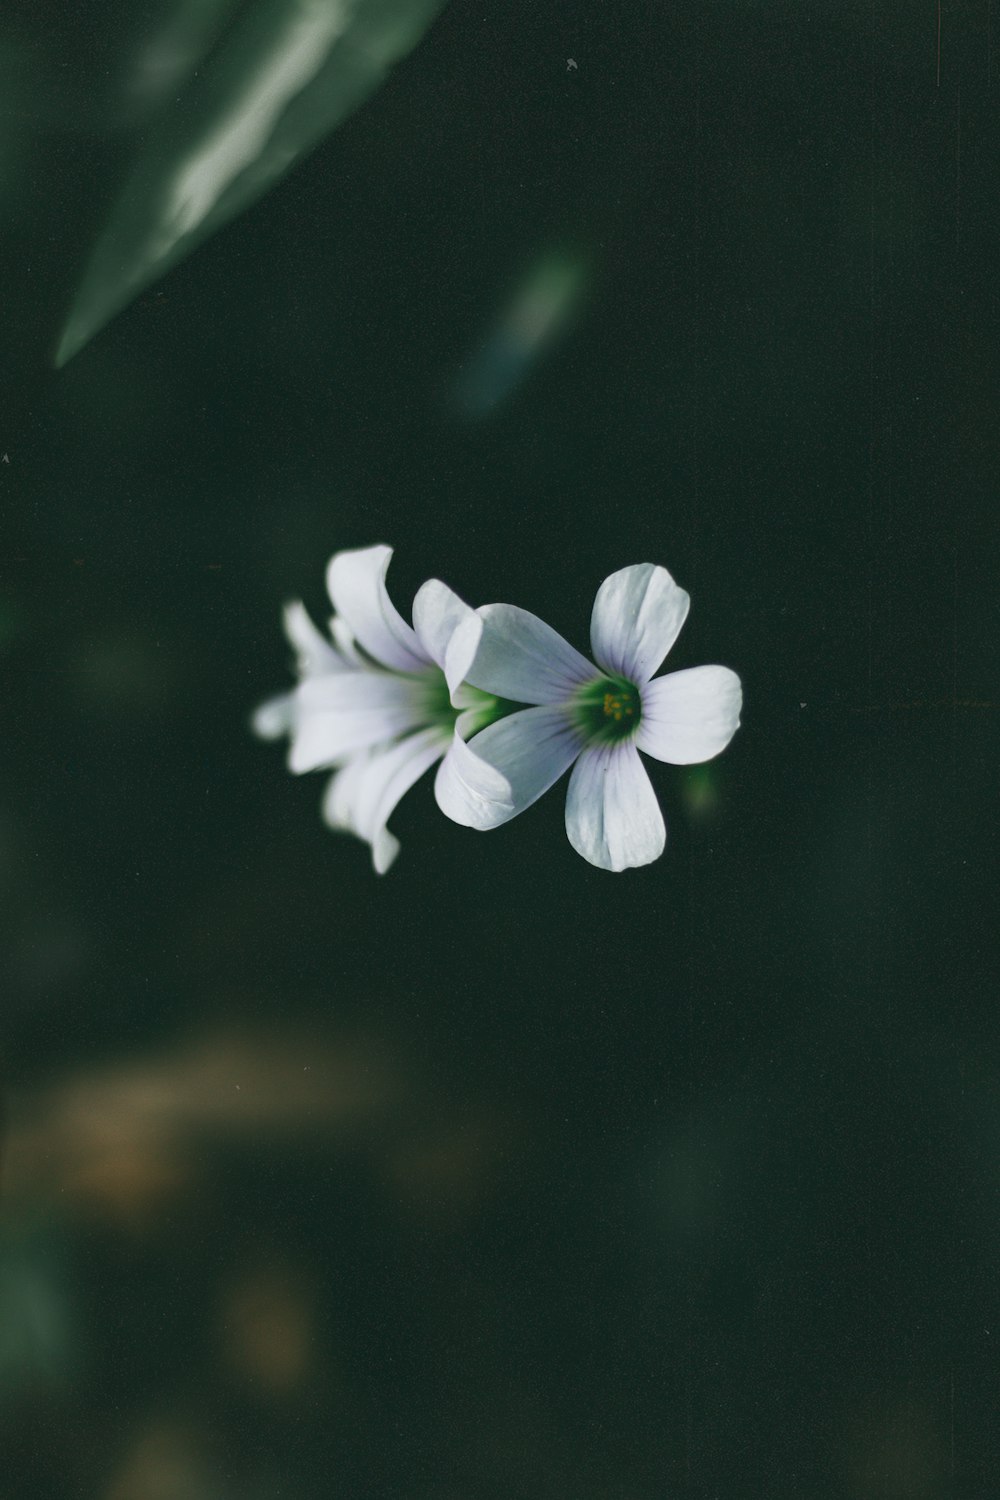 a white flower with a green center on a dark background